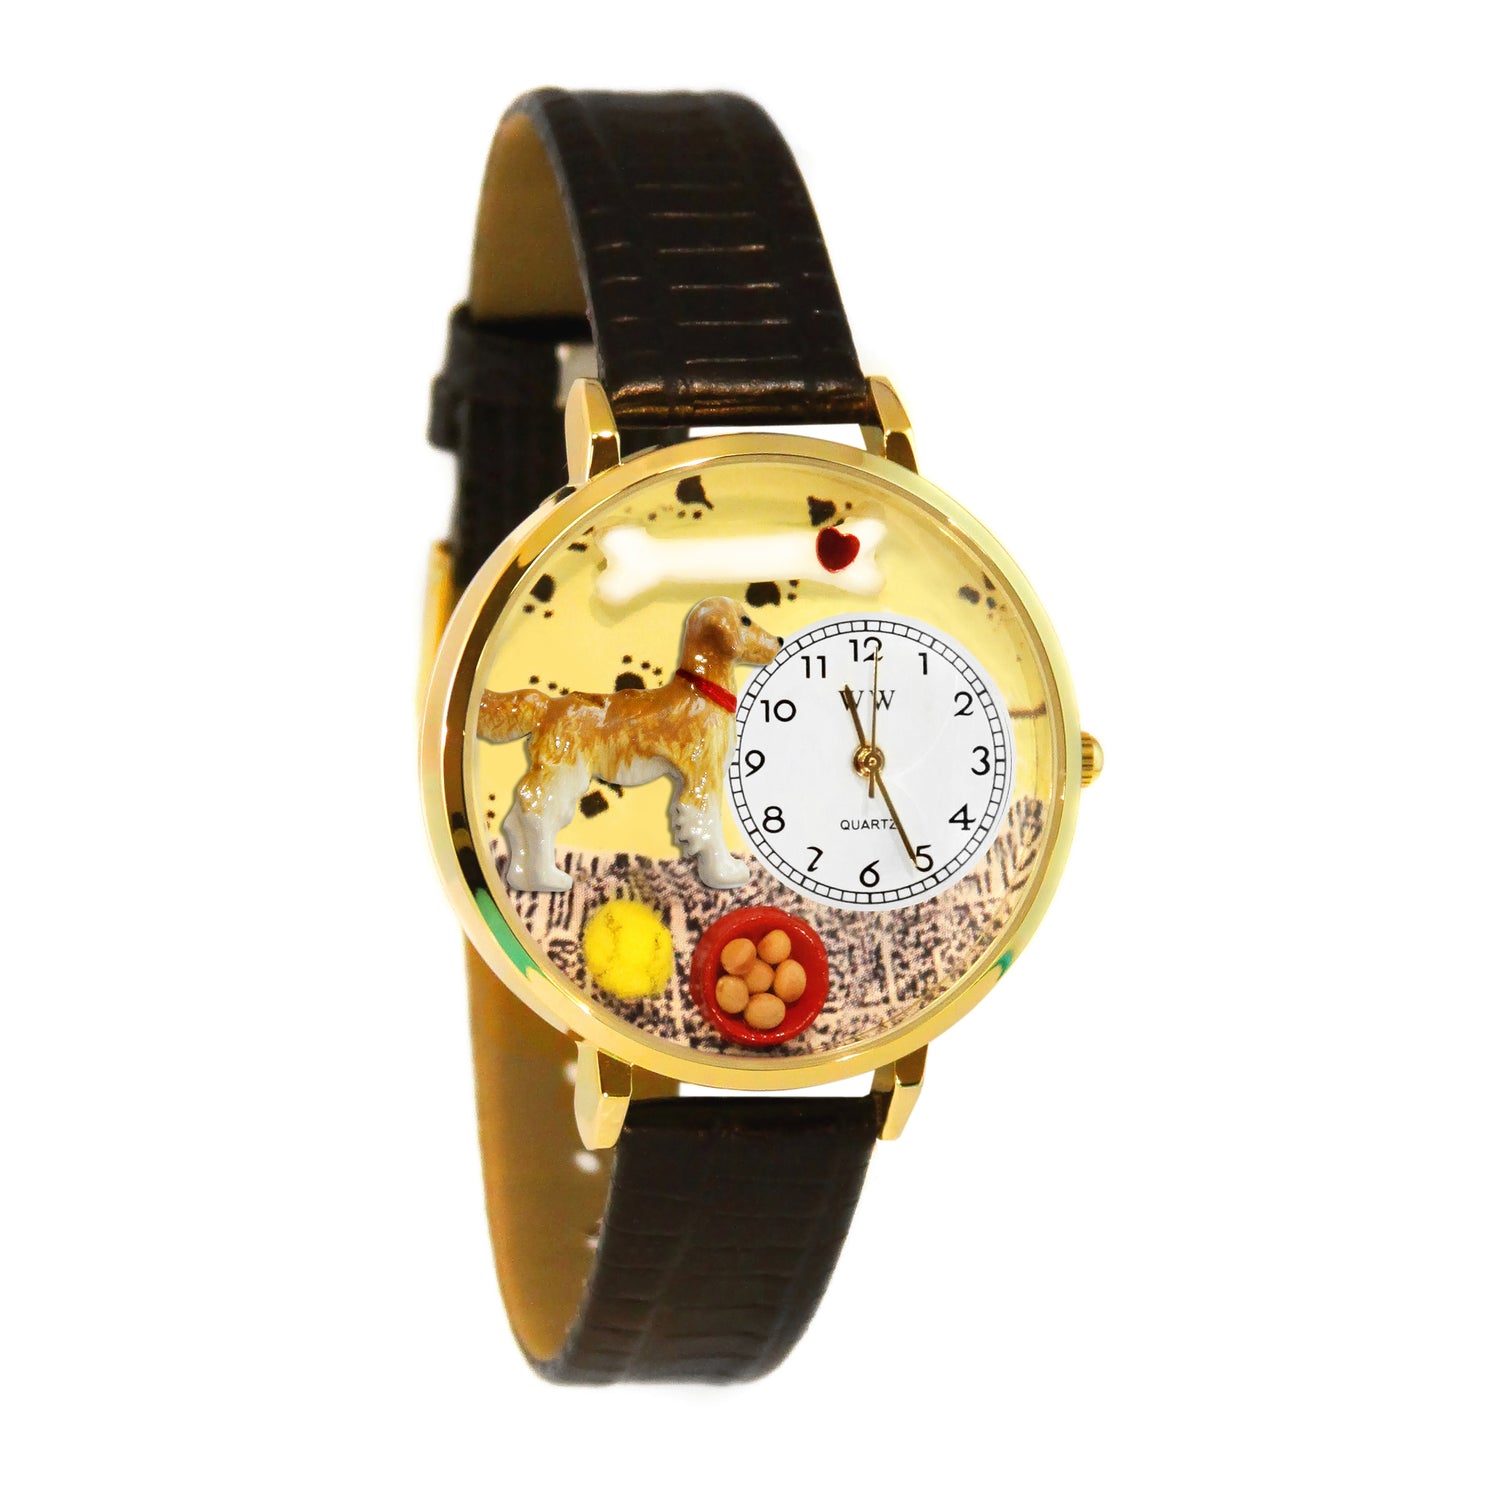 Whimsical Gifts | Golden Retriever 3D Watch Large Style | Handmade in USA | Animal Lover | Dog Lover | Novelty Unique Fun Miniatures Gift | Gold Finish Black Leather Watch Band